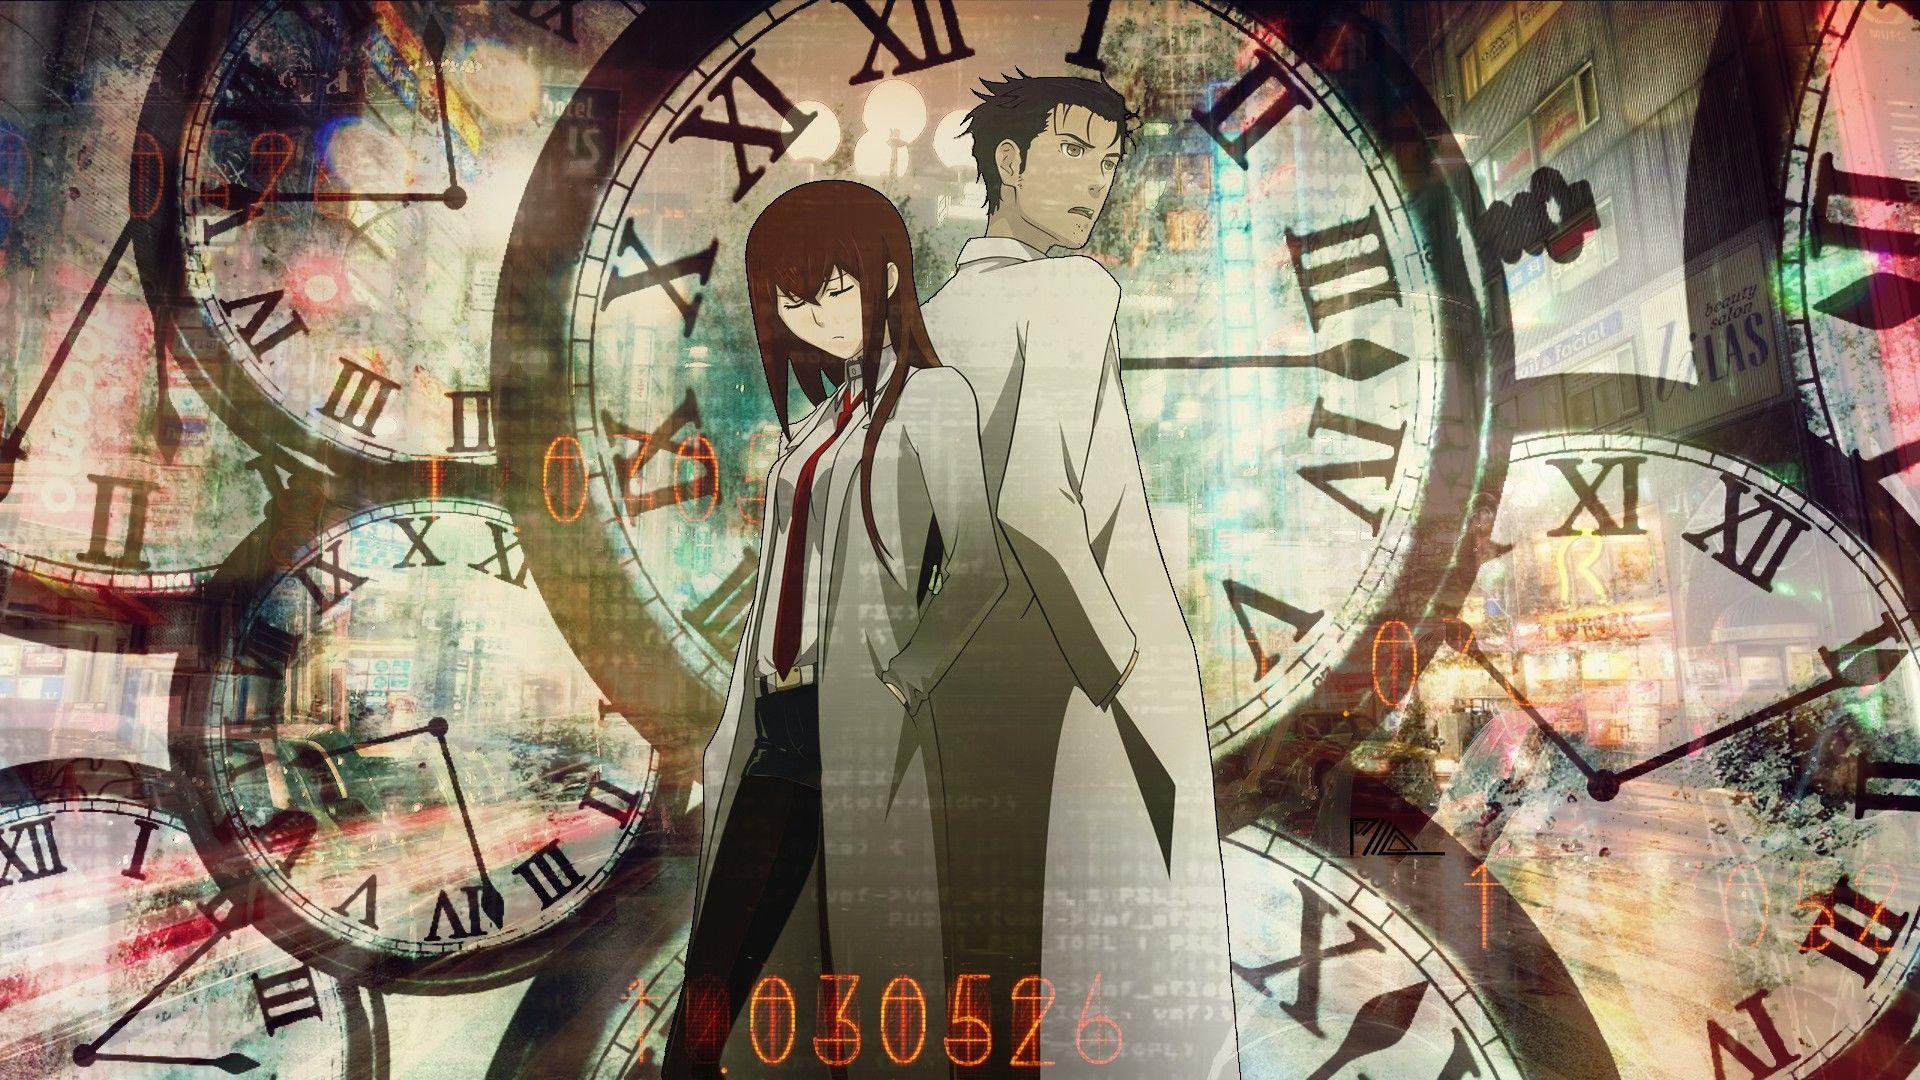 Anime Steins Gate Wallpapers Top Free Anime Steins Gate Backgrounds Wallpaperaccess